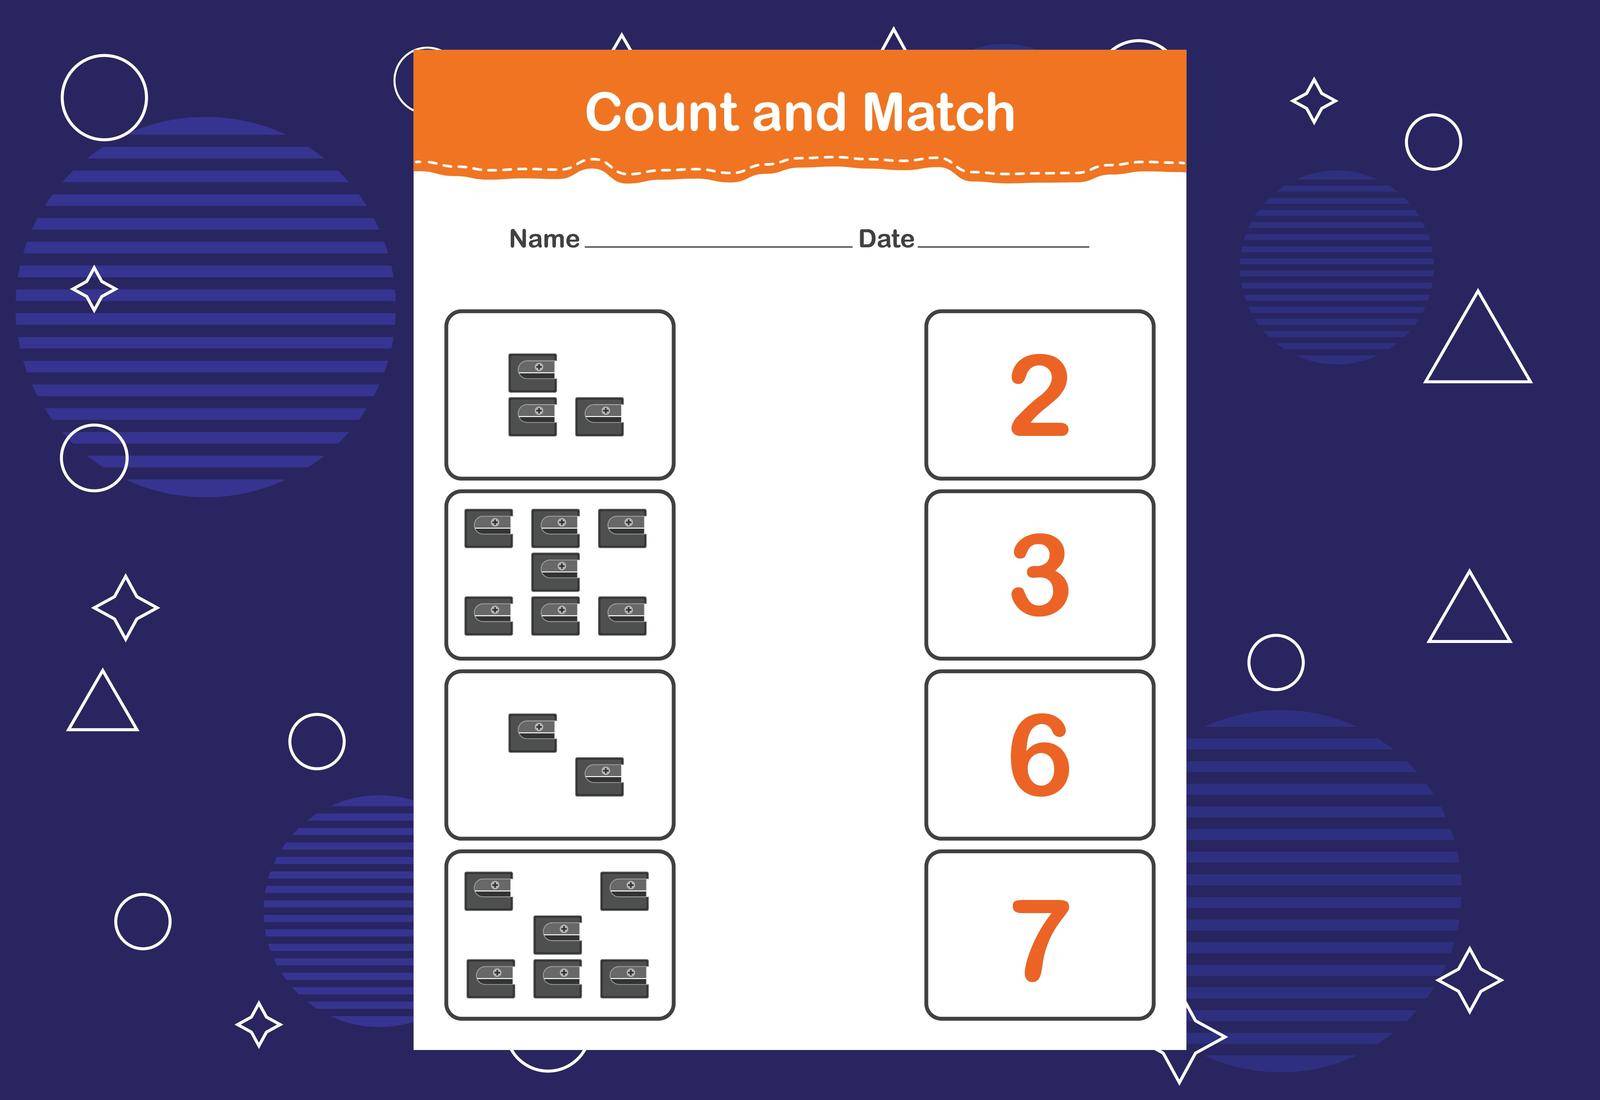 Count and Match worksheet for kids. Count and match with the correct number. Matching education game. by busrat